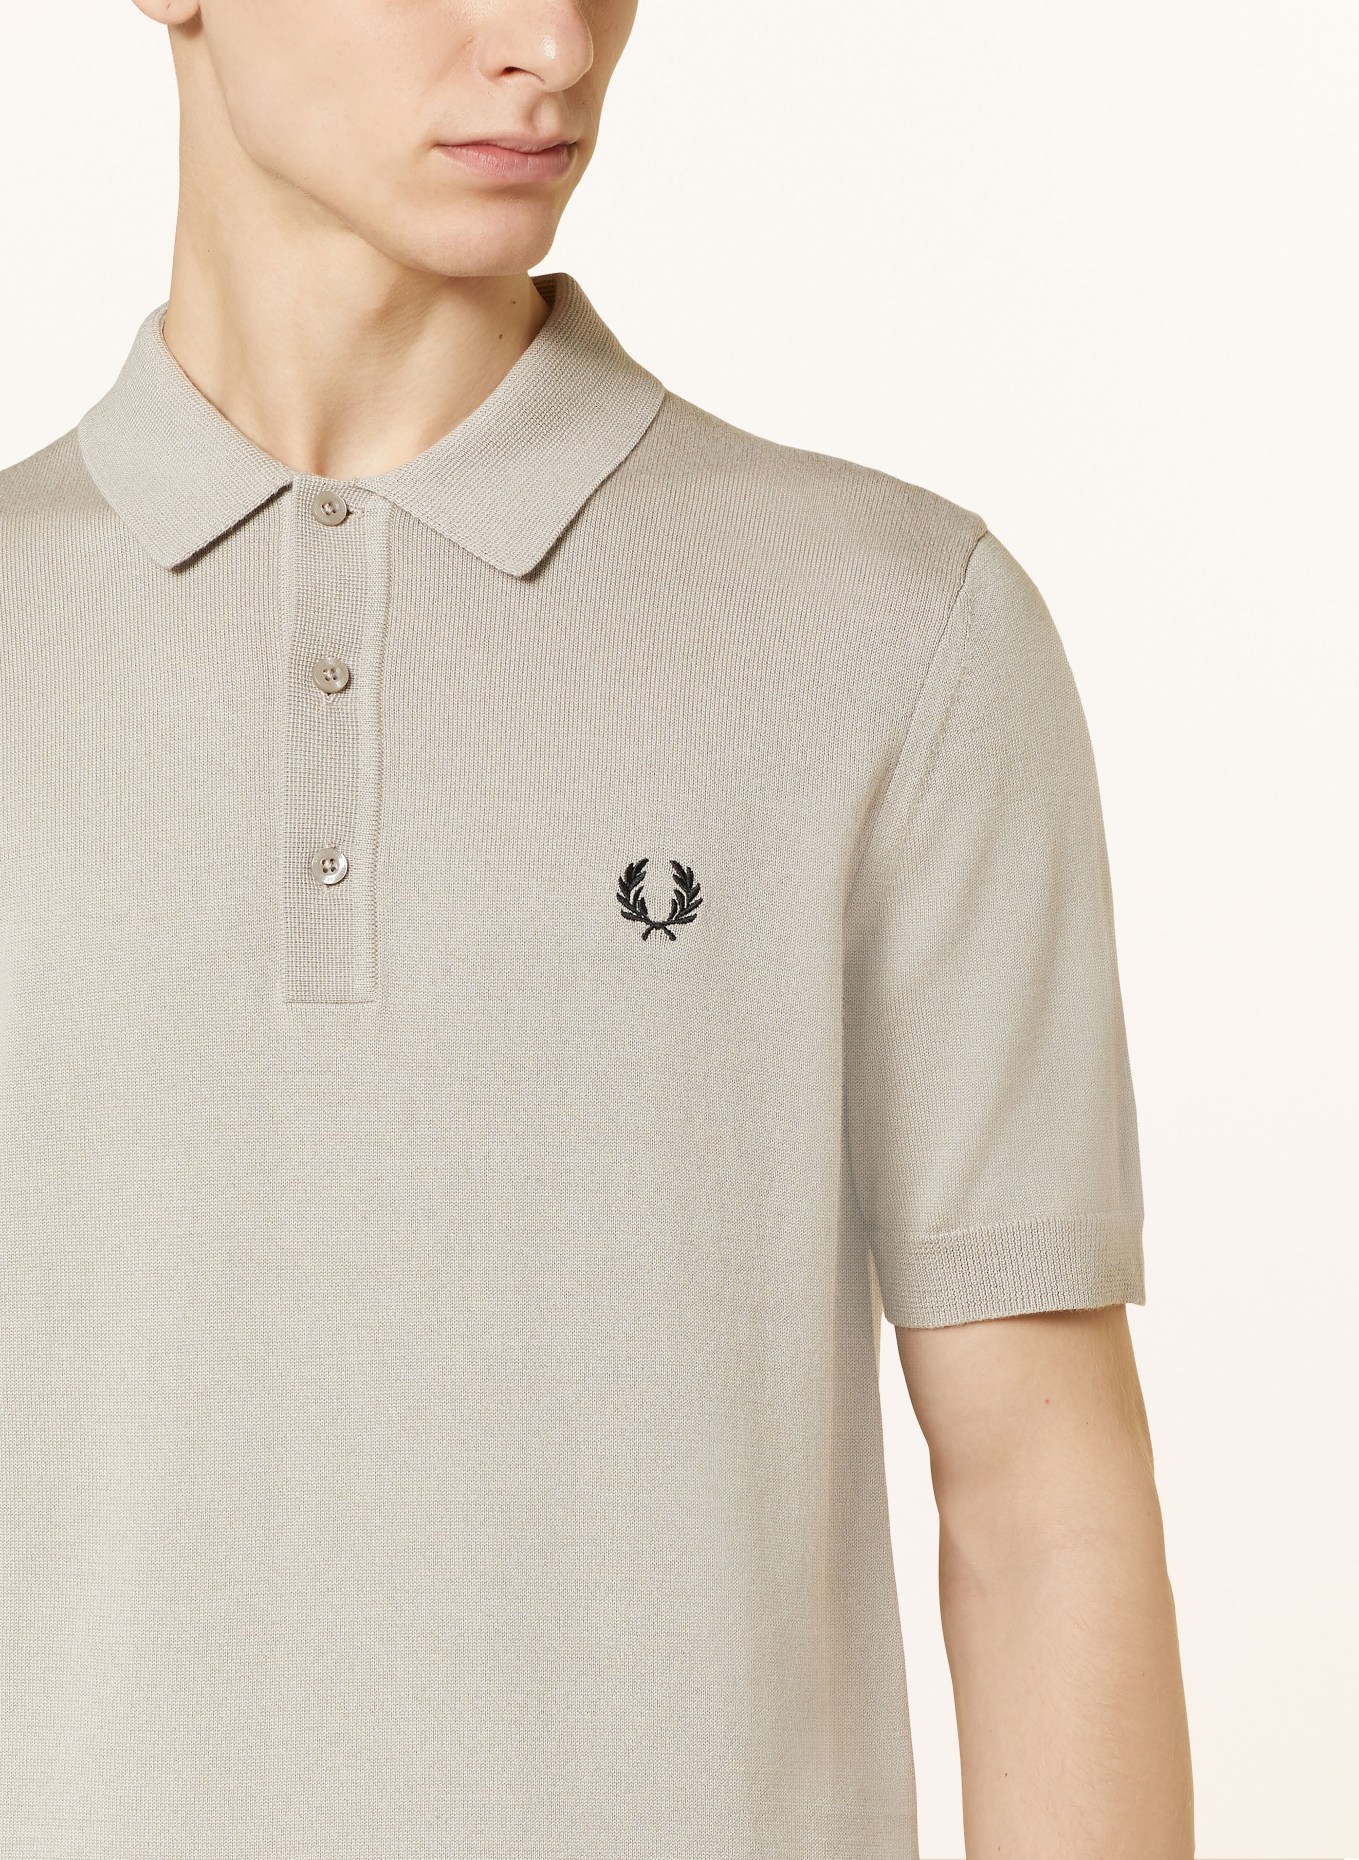 FRED PERRY Strick-Poloshirt, Farbe: TAUPE (Bild 4)